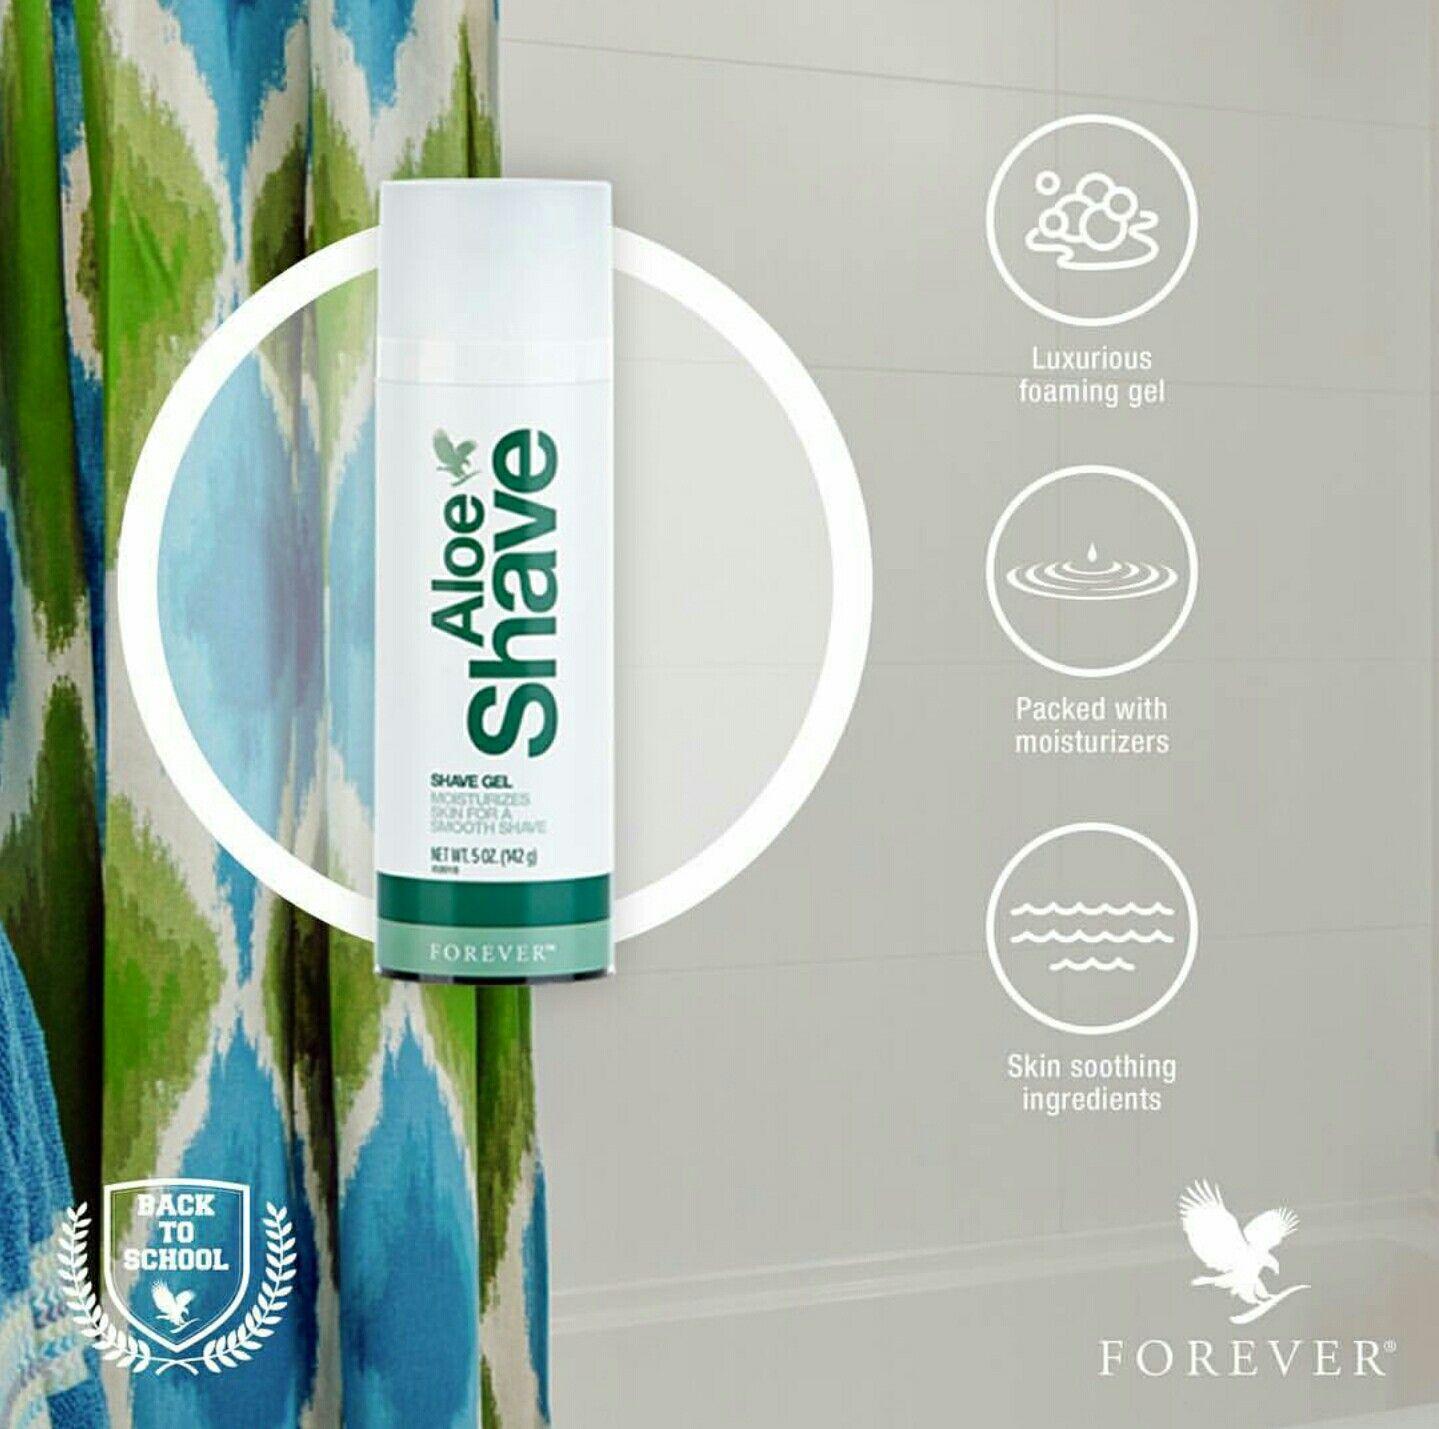 Shaving and Personal Care Products Logo - Aloe Shave | Forever Personal Care | Pinterest | Forever living ...